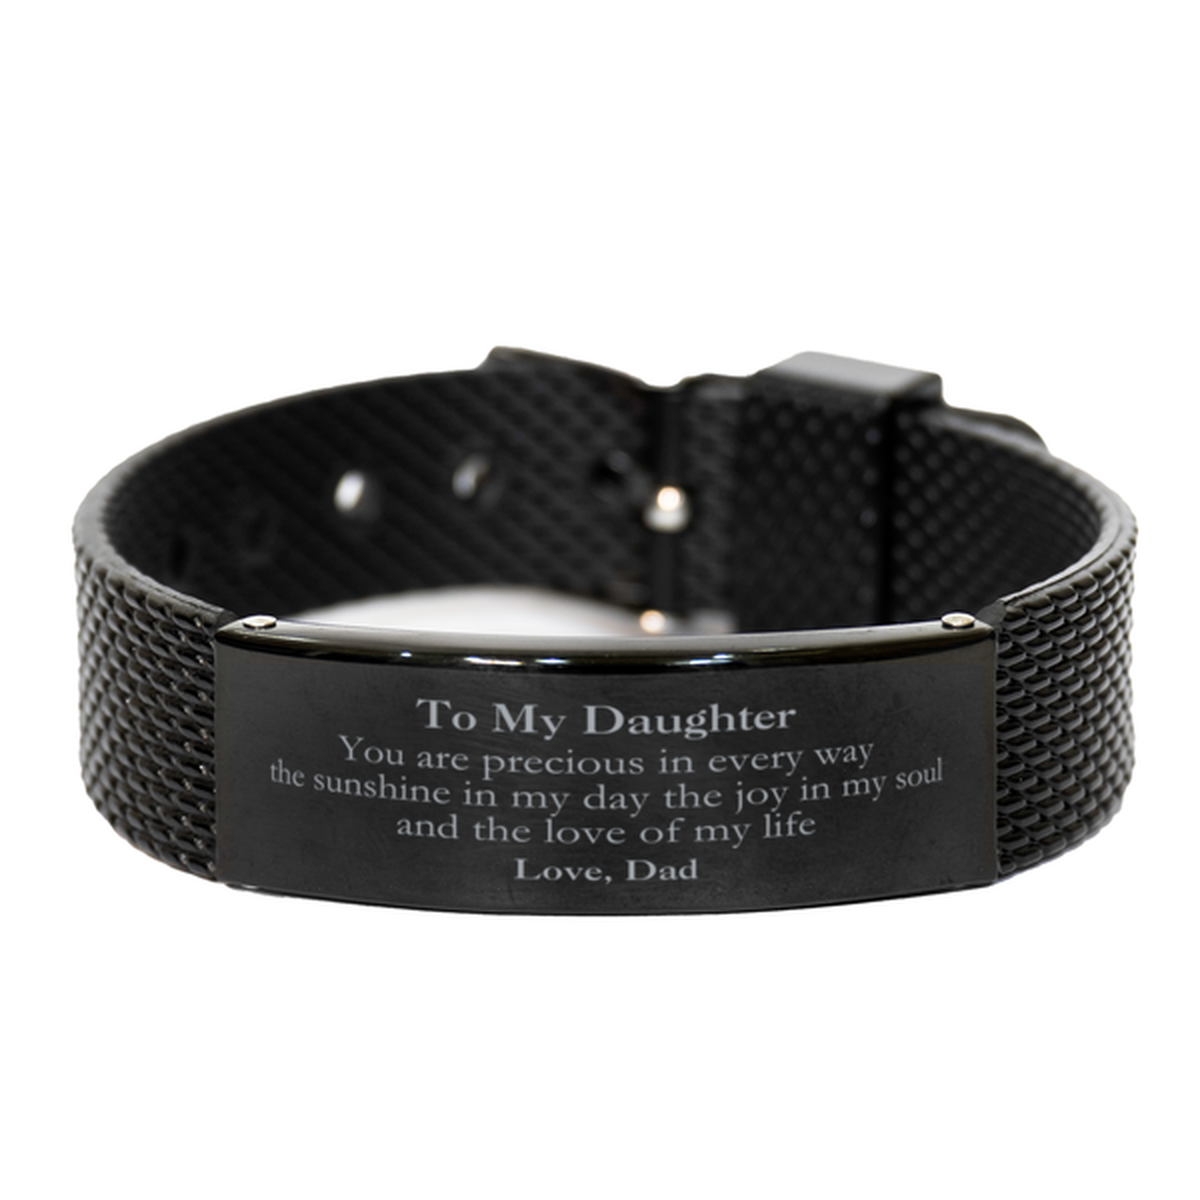 Graduation Gifts for Daughter Black Shark Mesh Bracelet Present from Dad, Christmas Daughter Birthday Gifts Daughter You are precious in every way the sunshine in my day. Love, Dad